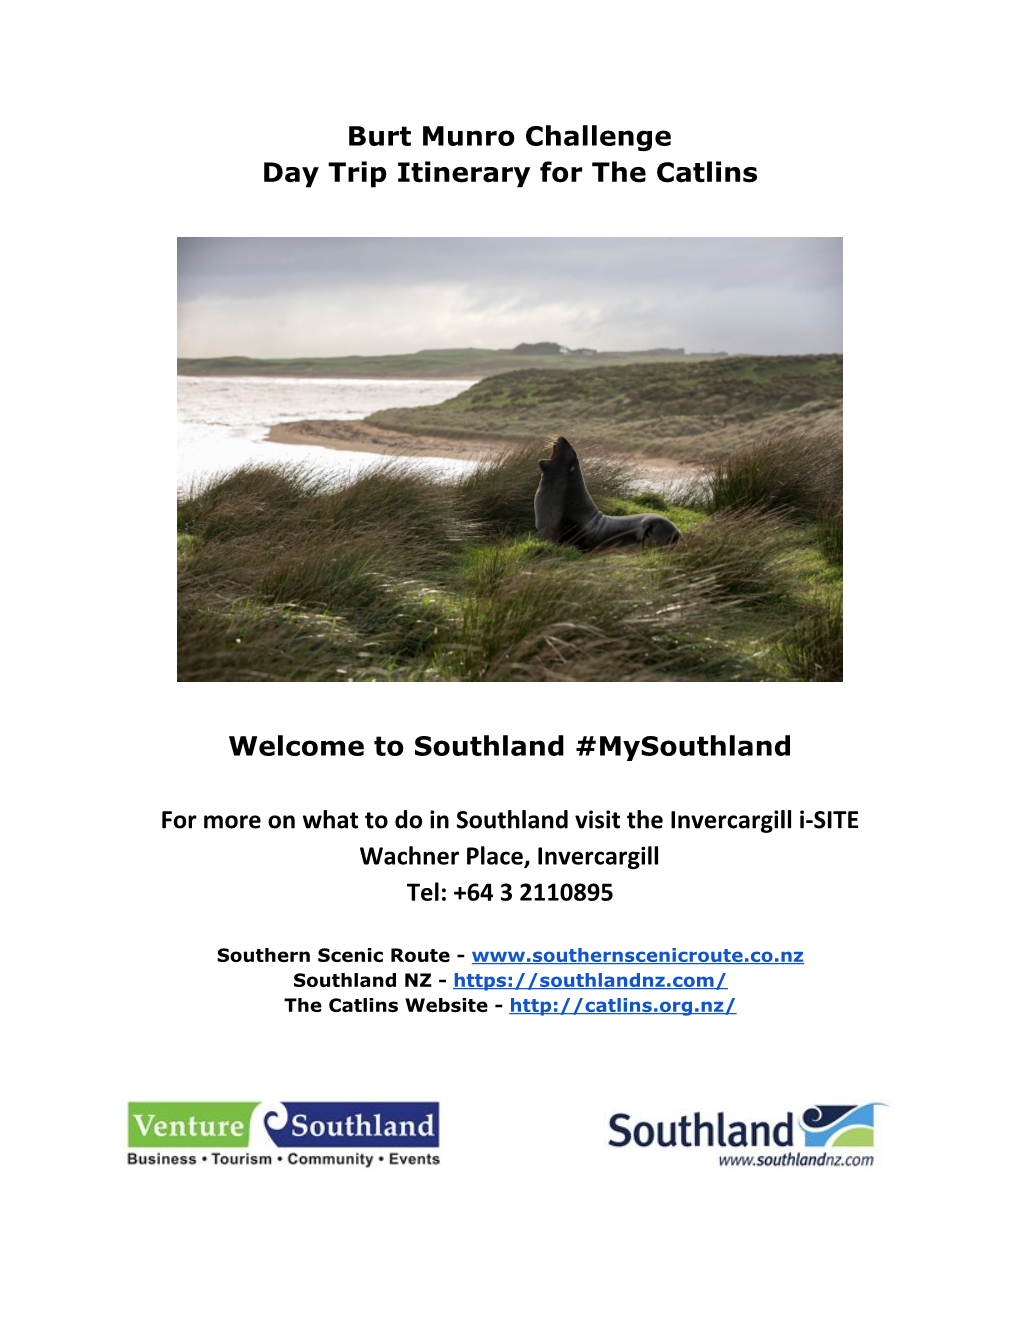 Burt Munro Challenge Day Trip Itinerary for the Catlins Welcome To